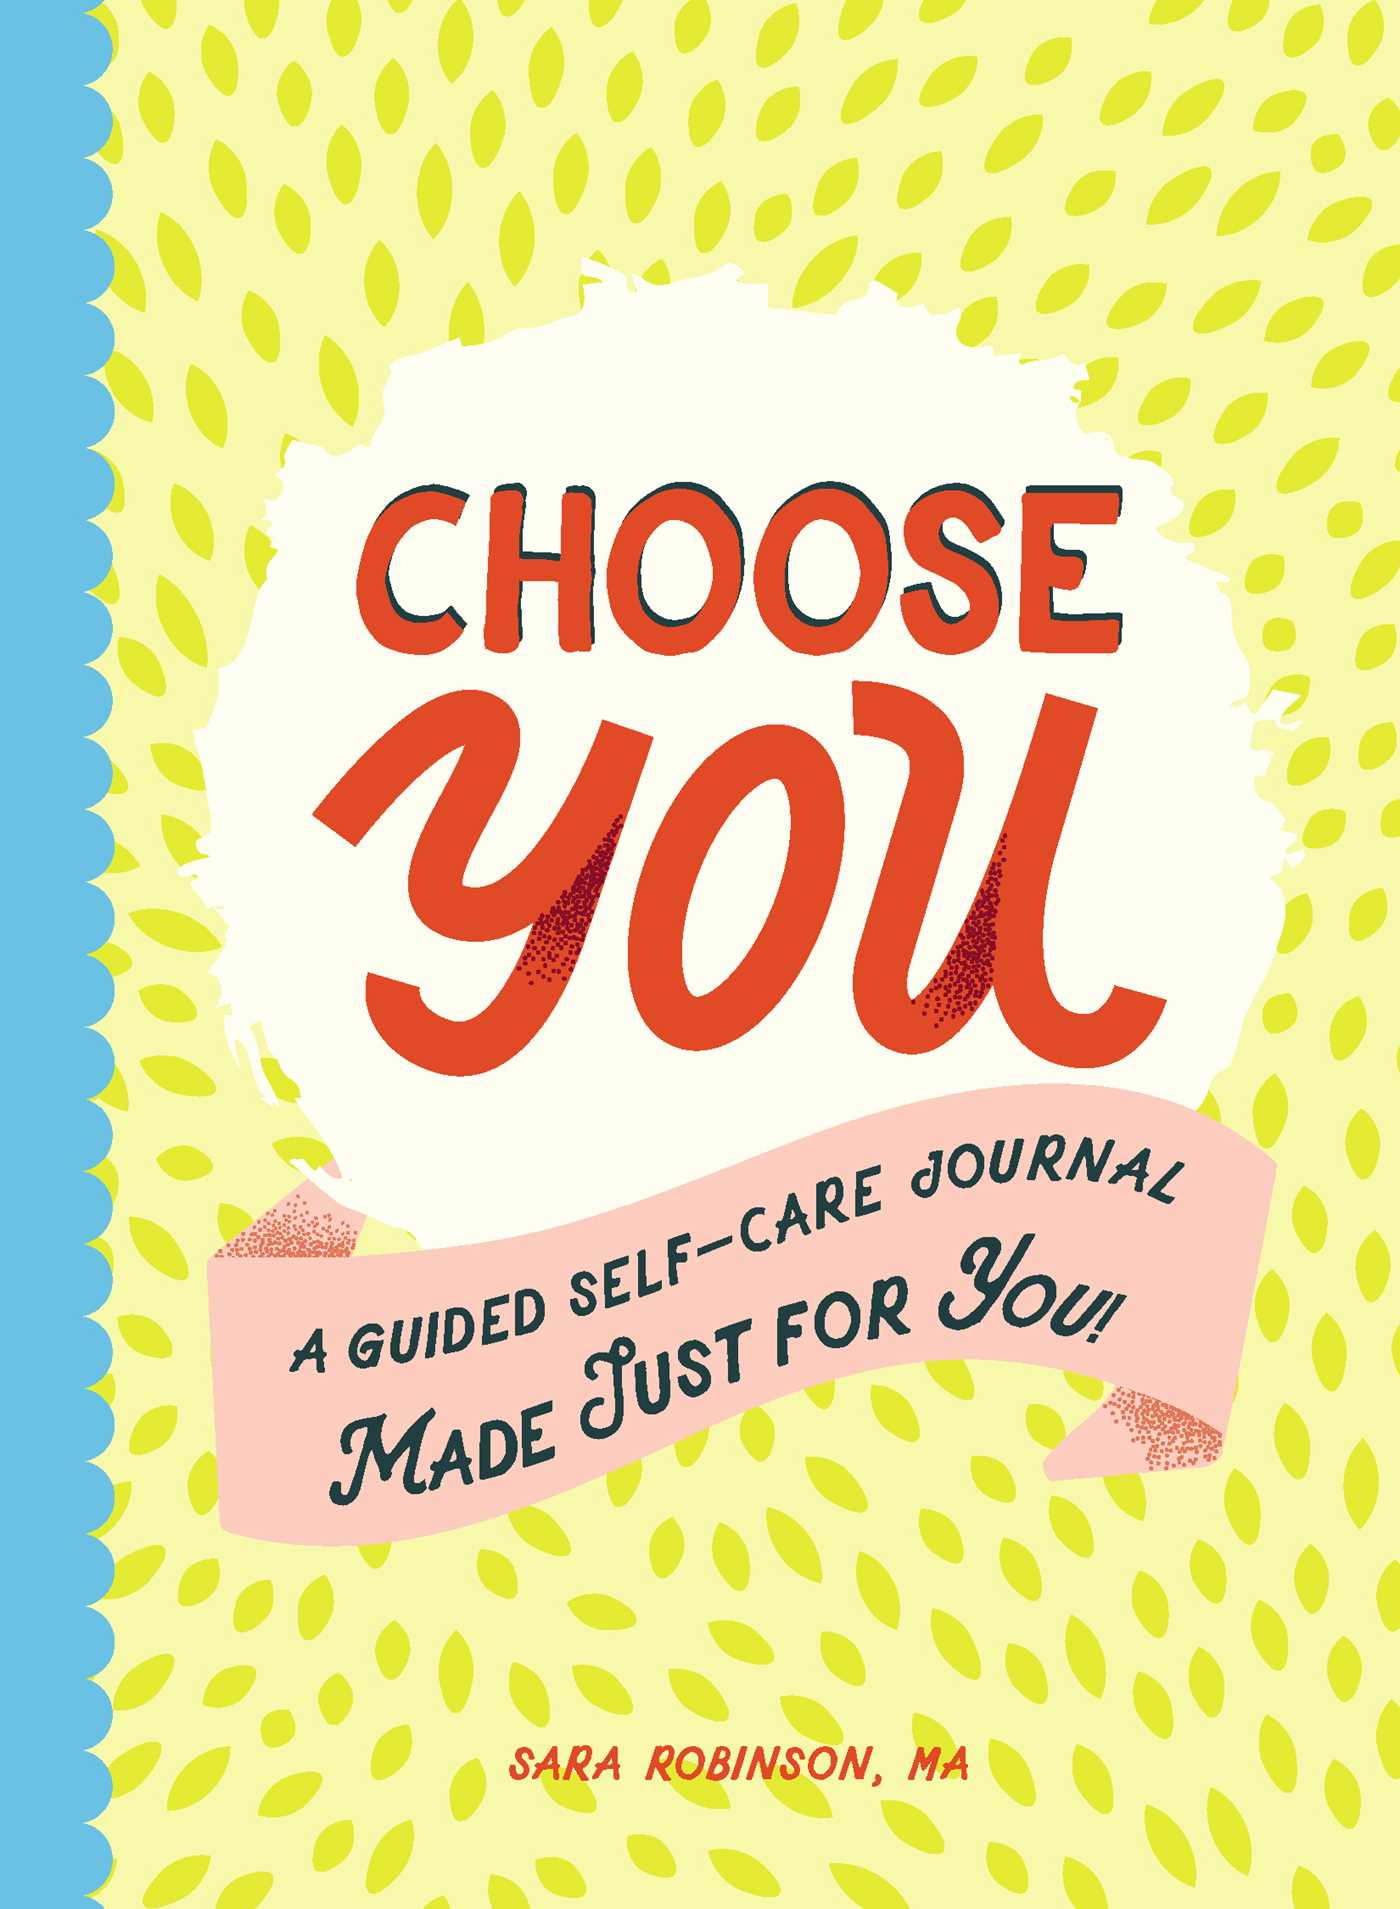 Choose You : A Guided Self-Care Journal Made Just for You!